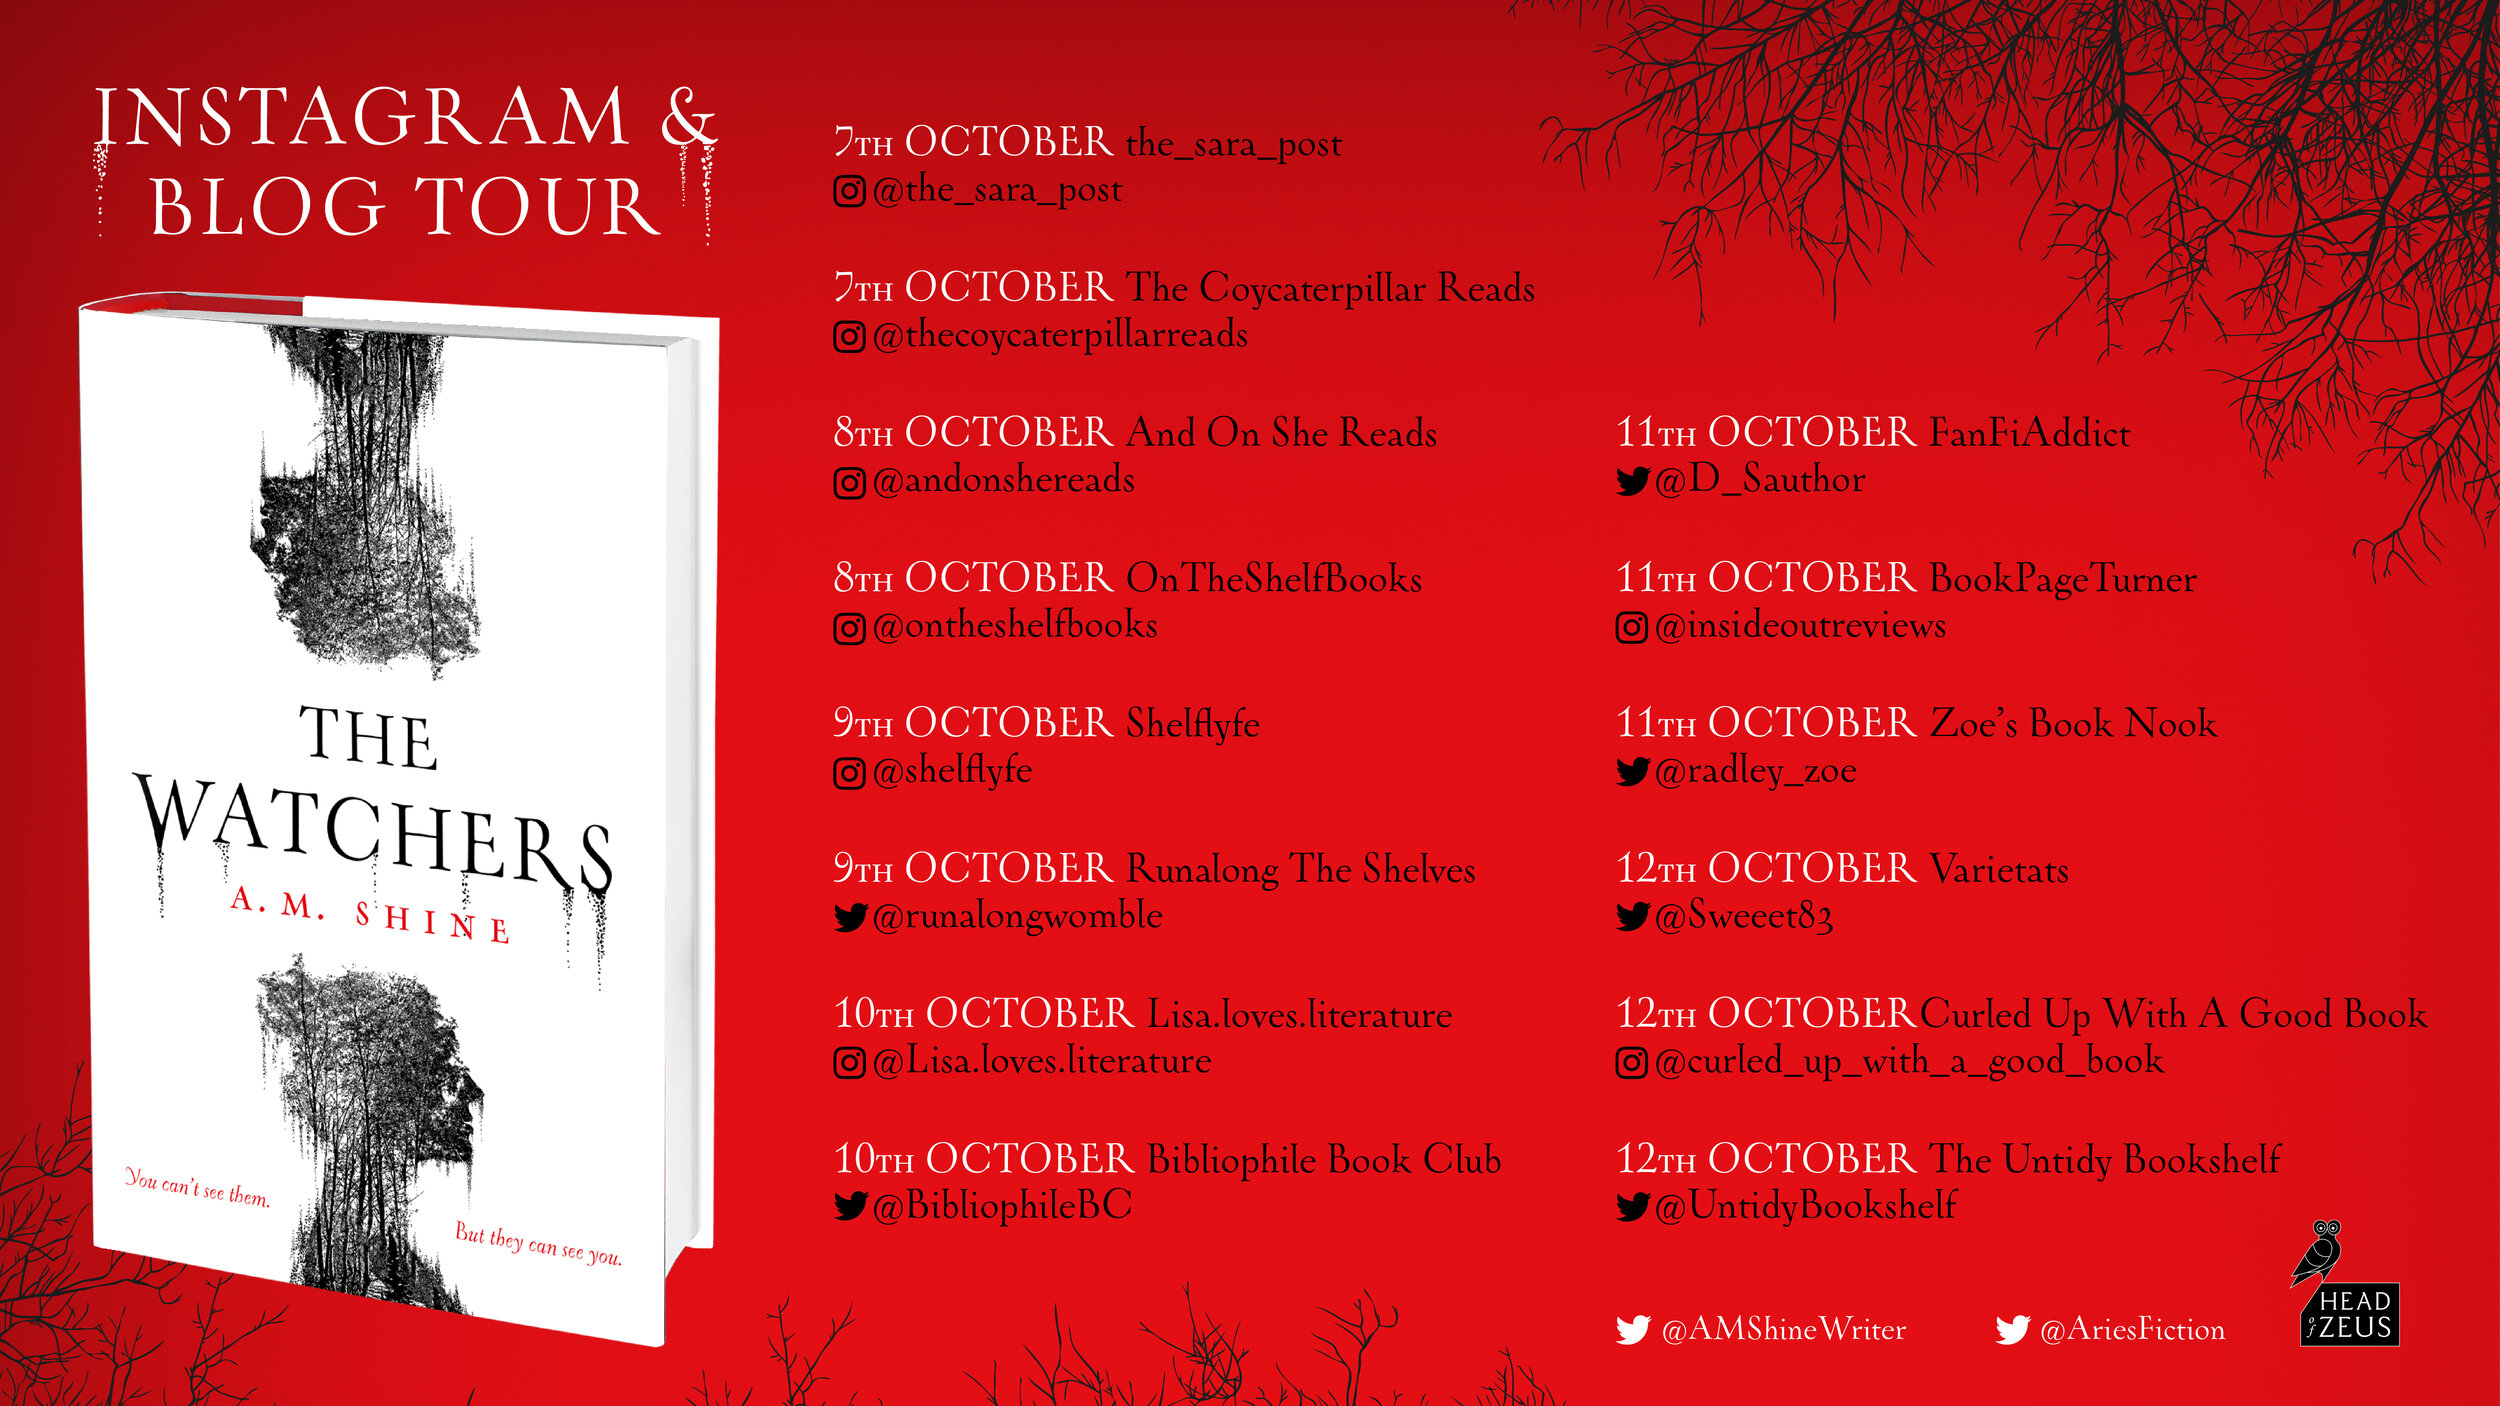 Shine_THE WATCHERS_blog tour banner_with icons.jpg